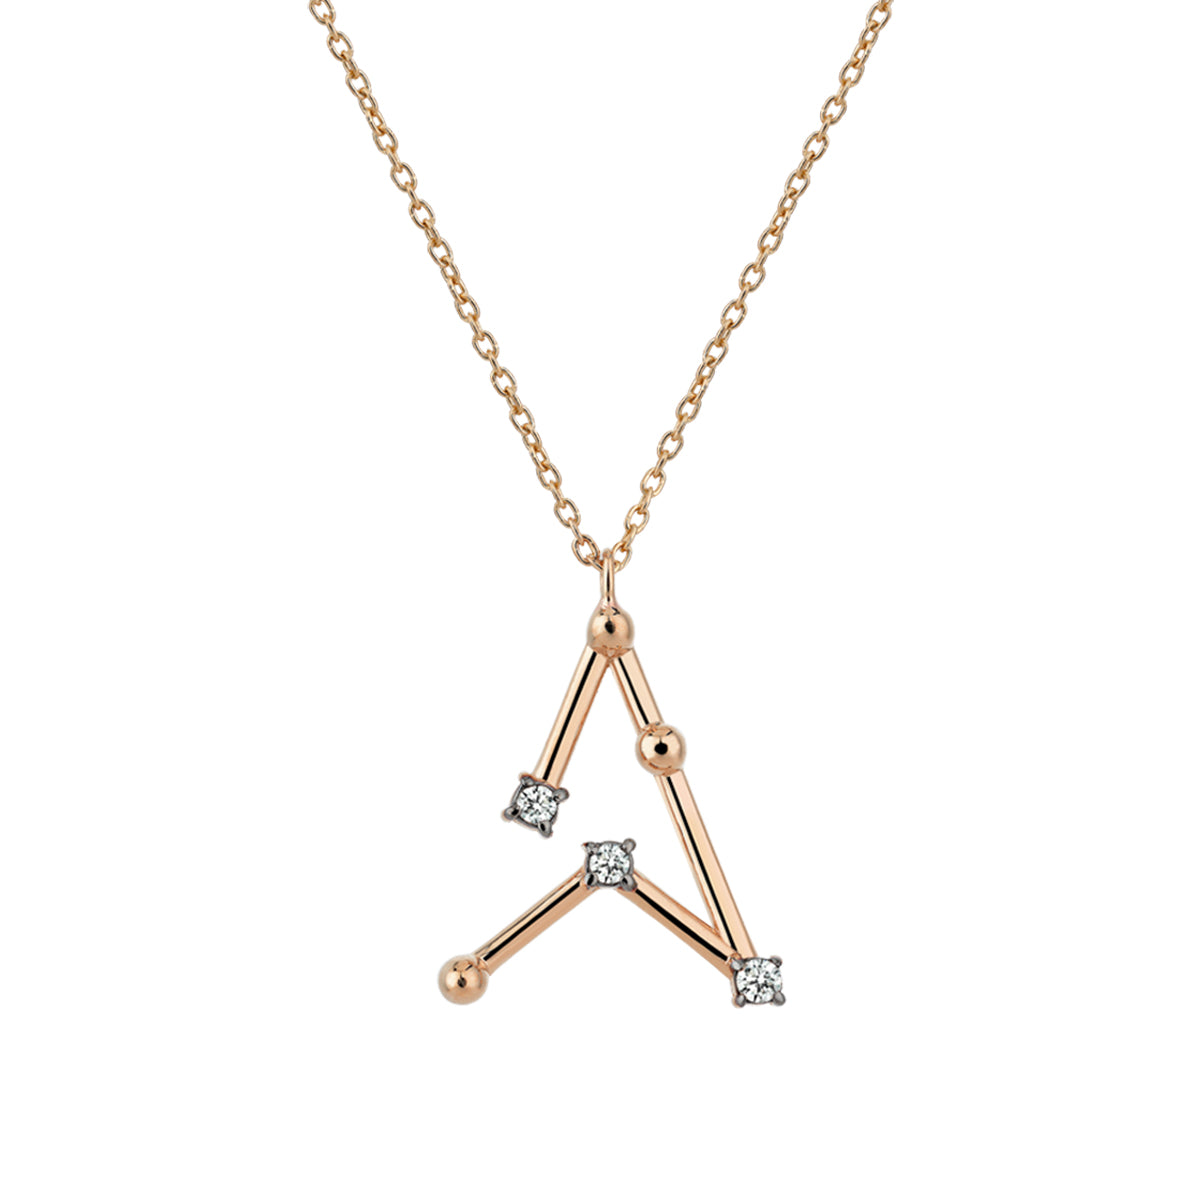 Galactic Necklace Initials in Rose Gold - Her Story Shop